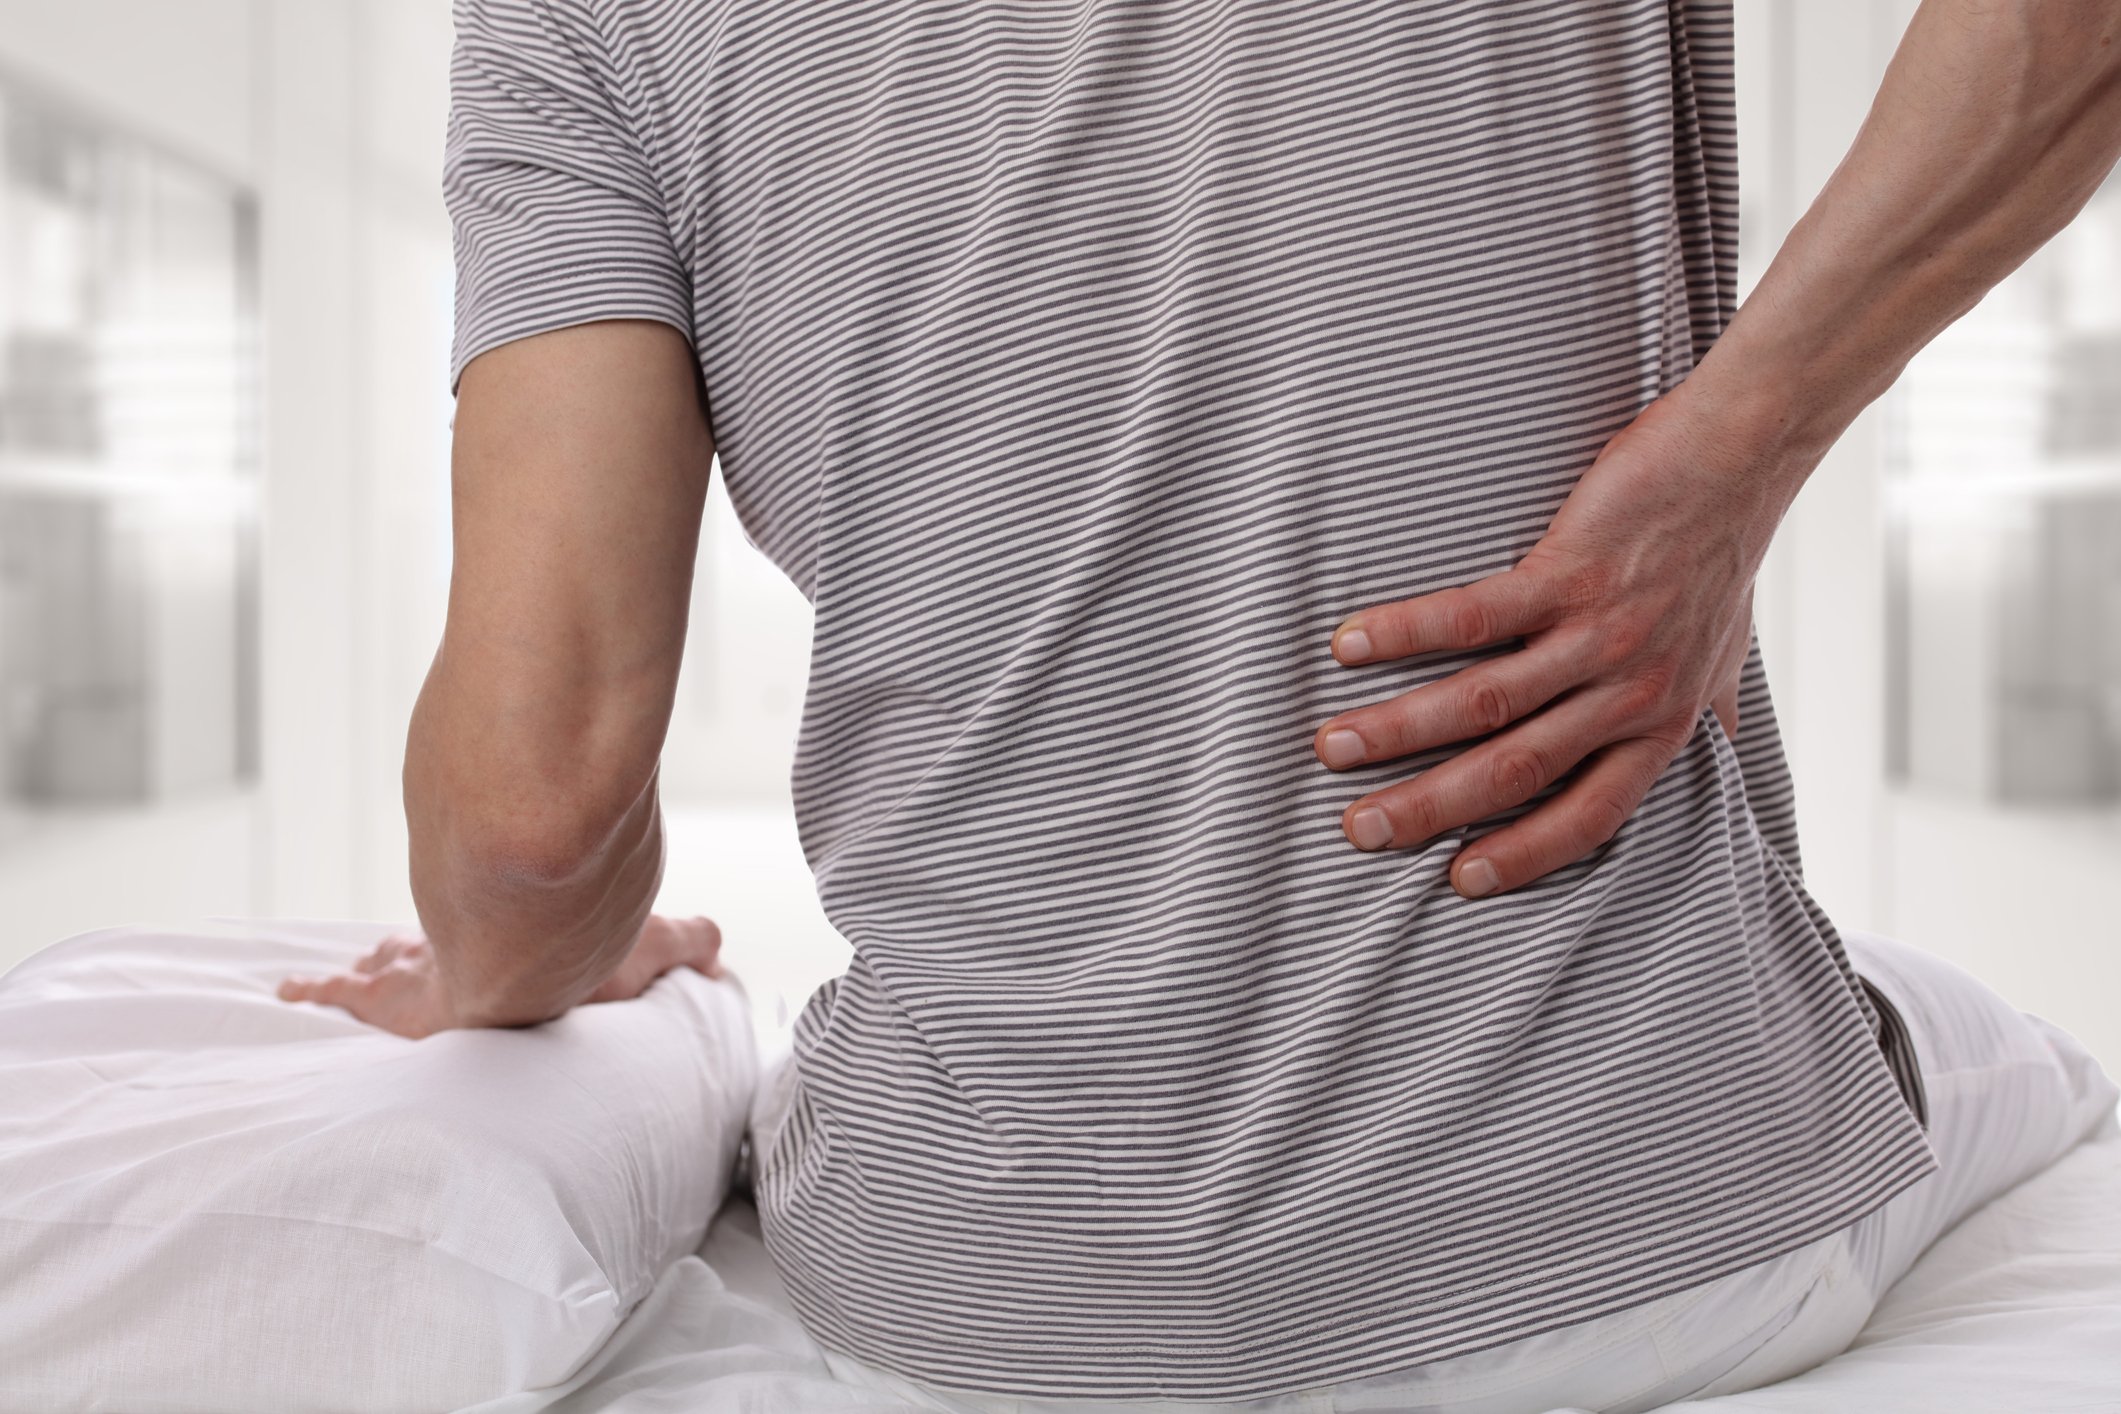 What can I do to avoid having an injection for back pain?